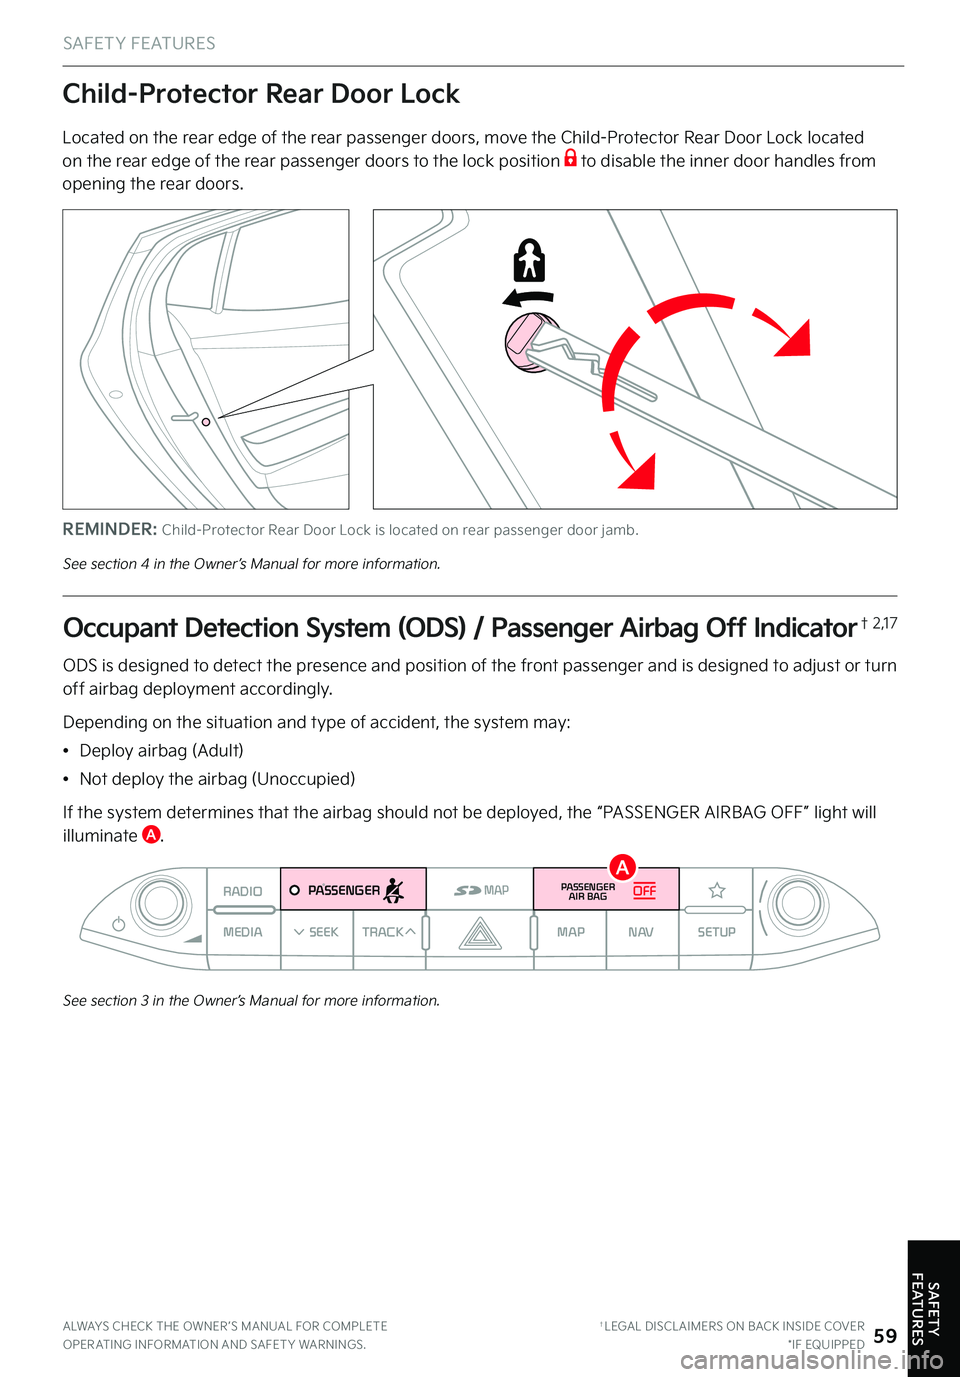 KIA STINGER 2022  Features and Functions Guide See section 3 in the Owner’s Manual for more information .
RADIO
MEDIA SEEKTRACK MAP
N AVSETUPMAPPASSENGERPASSENGER
AIR BAGOFF
Occupant Detection System (ODS) / Passenger Airbag Off Indicator† 2 ,